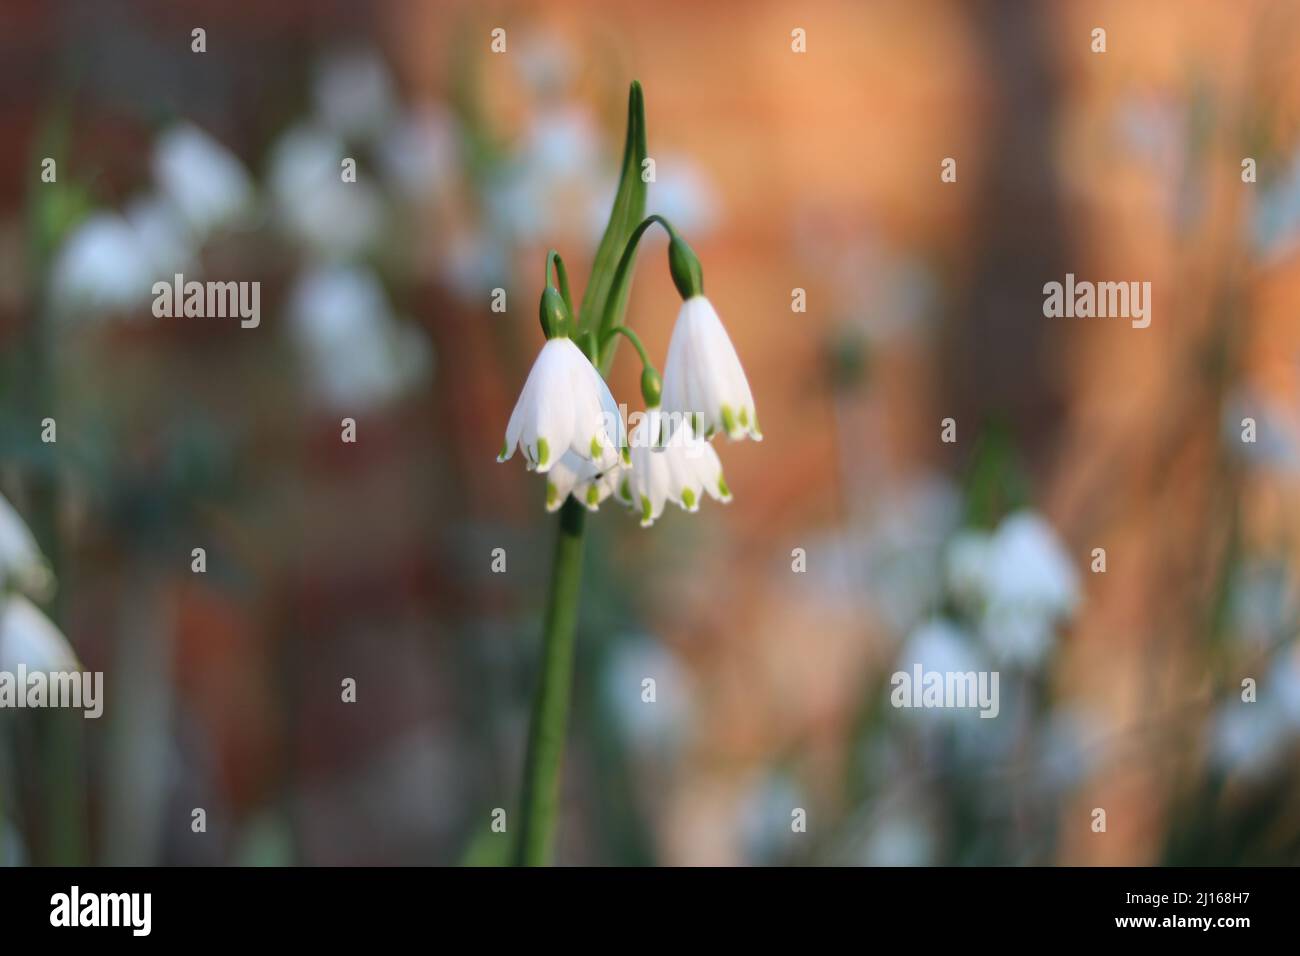 Close up of white galanthus or snowdrop against soft blurred background Stock Photo